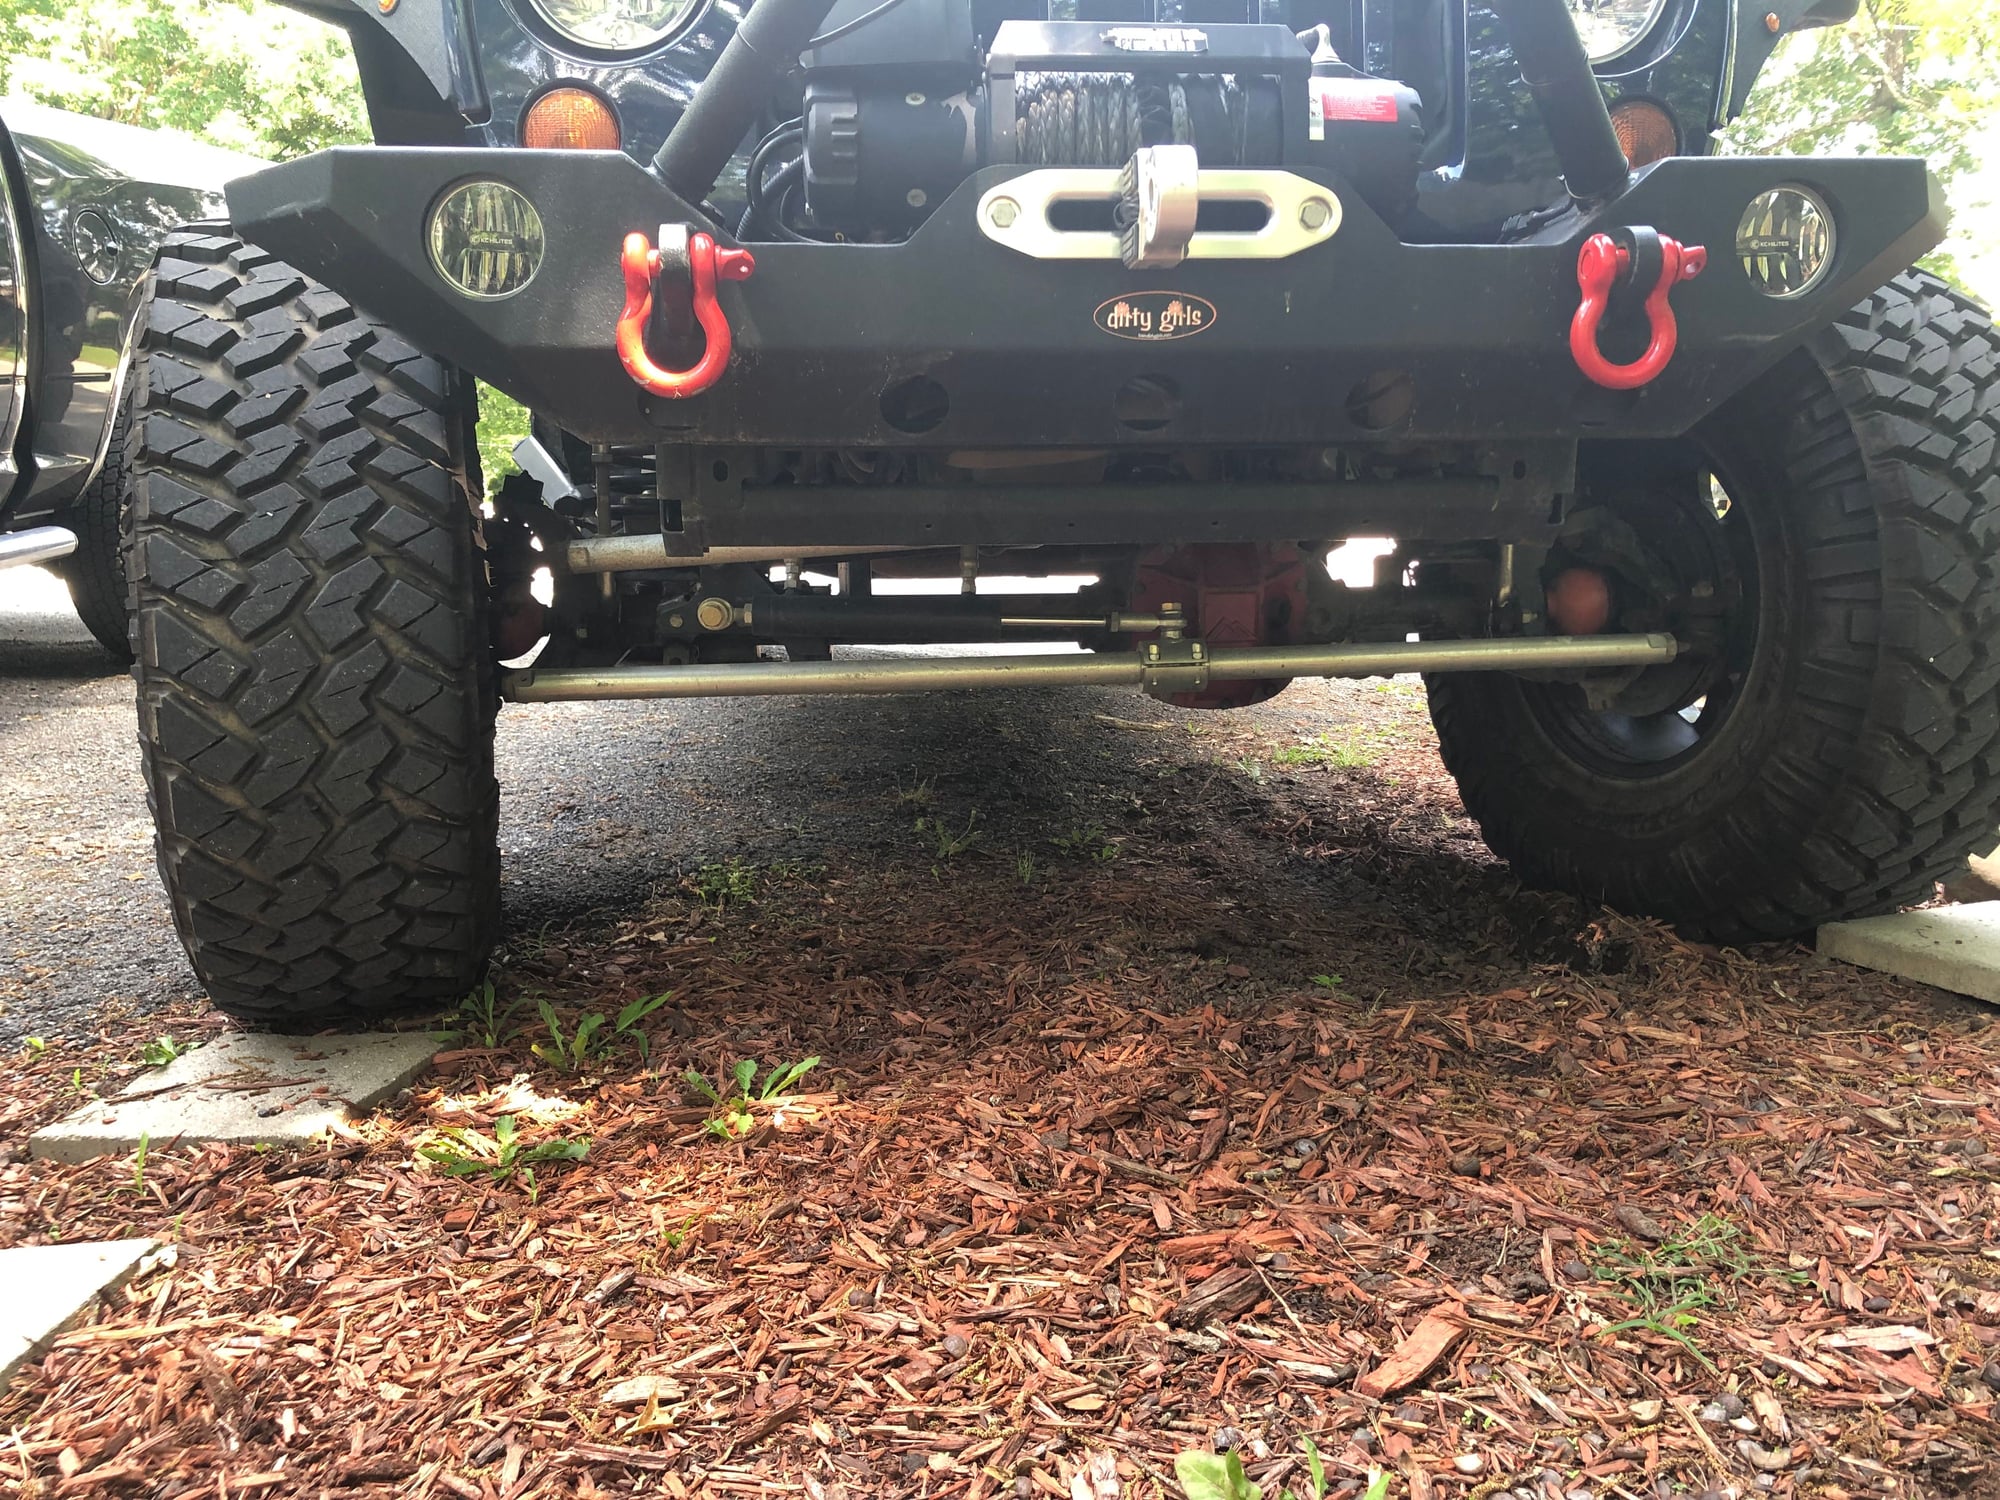 Wheels and Tires/Axles - Jeep Dana 30 front axle - Used - 2008 to 2018 Jeep Wrangler - Chattanooga, TN 37421, United States